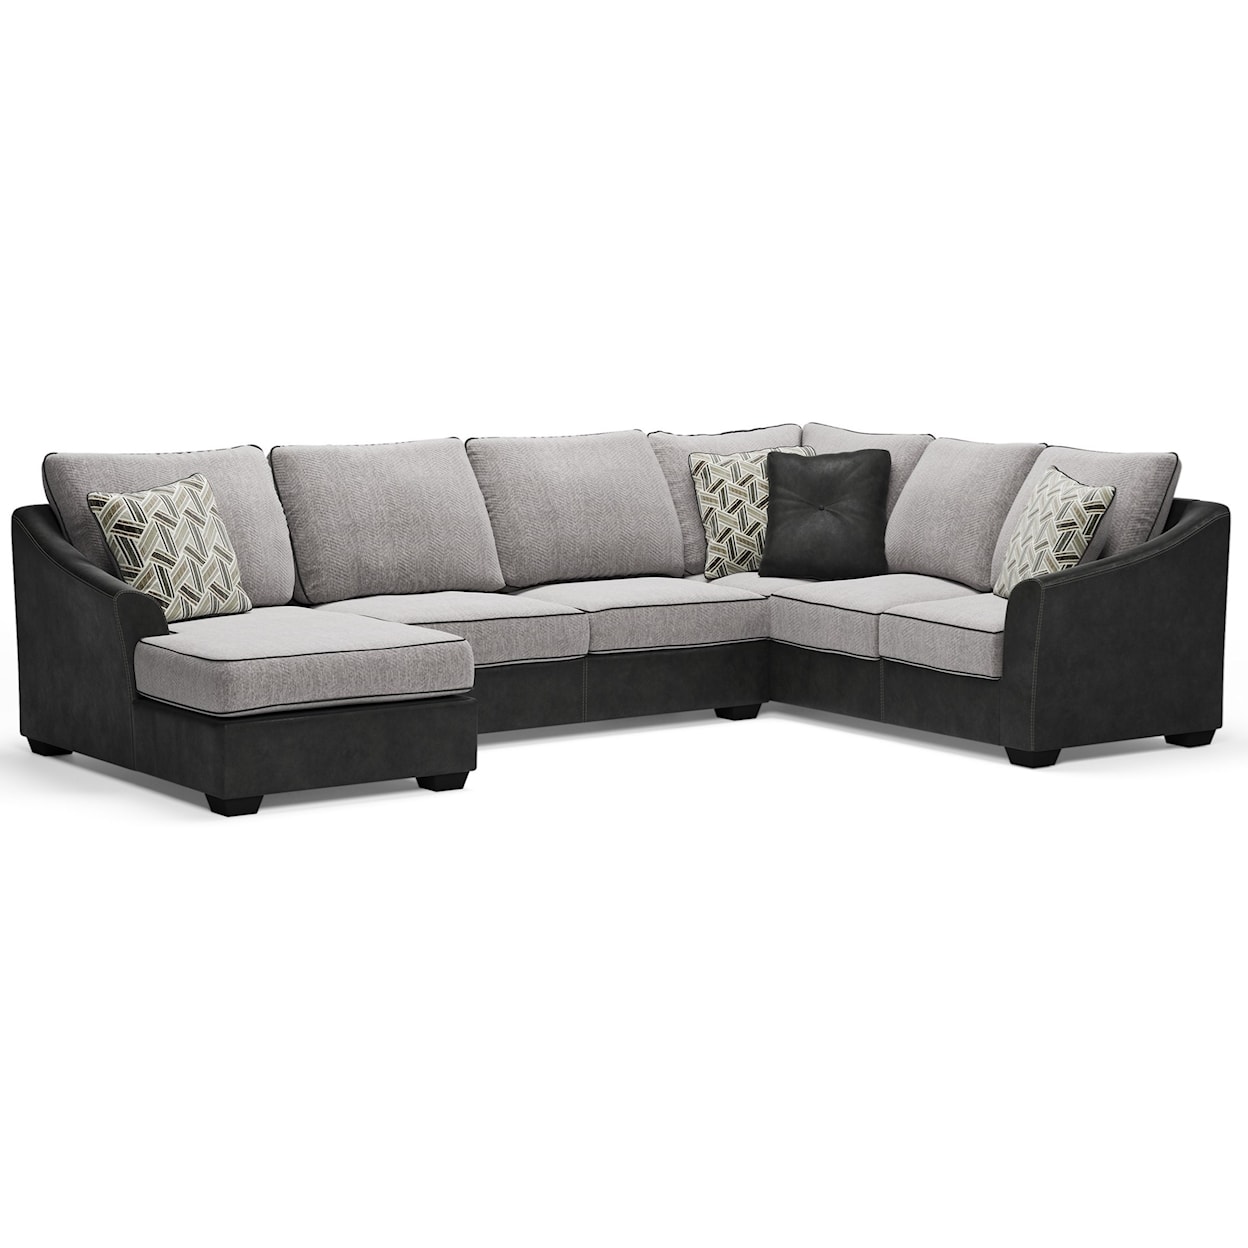 Signature Design by Ashley Furniture Bilgray Sectional with Left Chaise